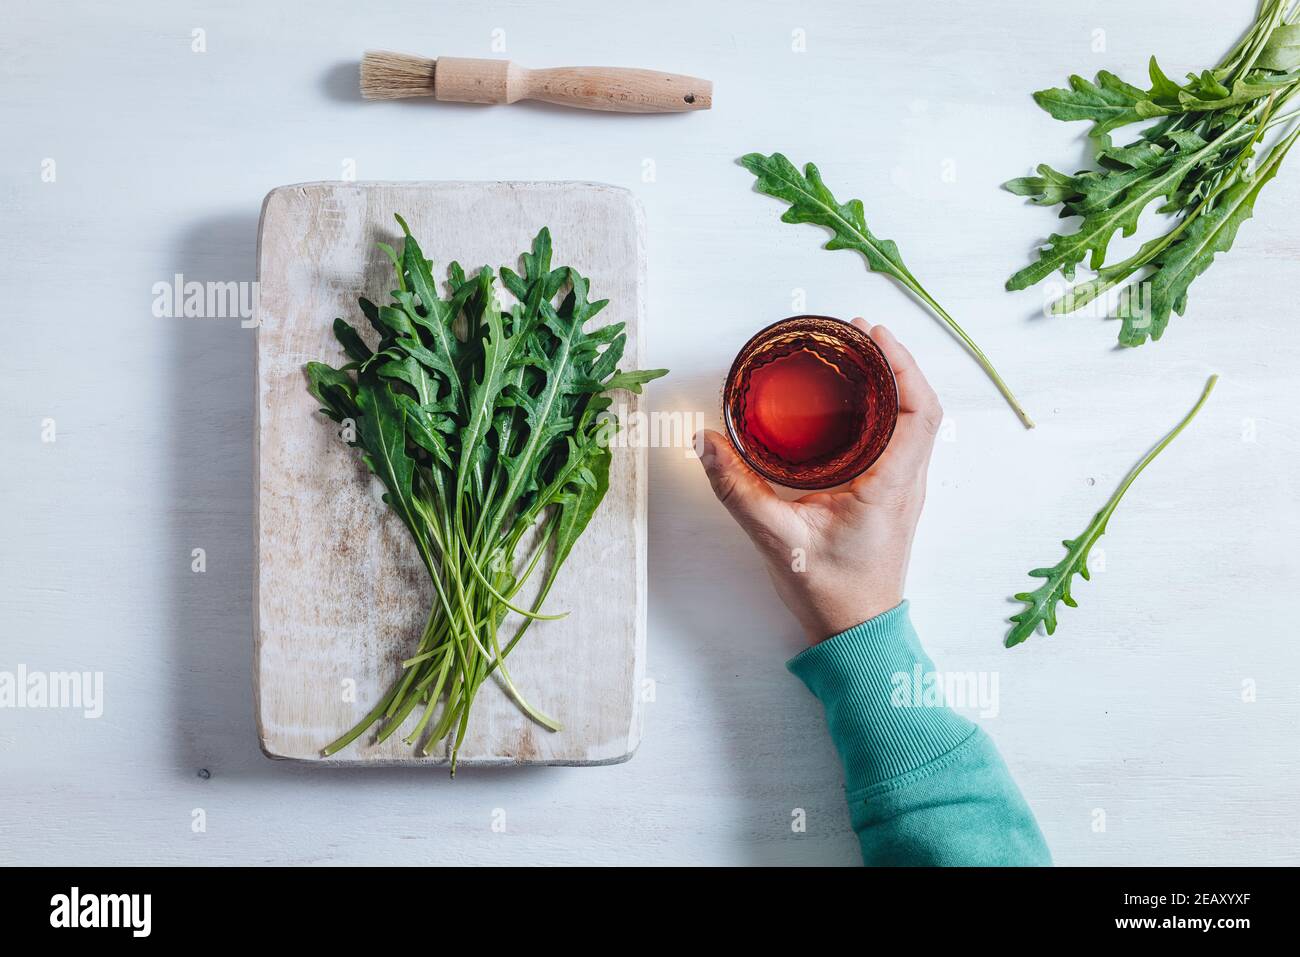 A bunch of fresh rocket leaves on a wooden table Stock Photo